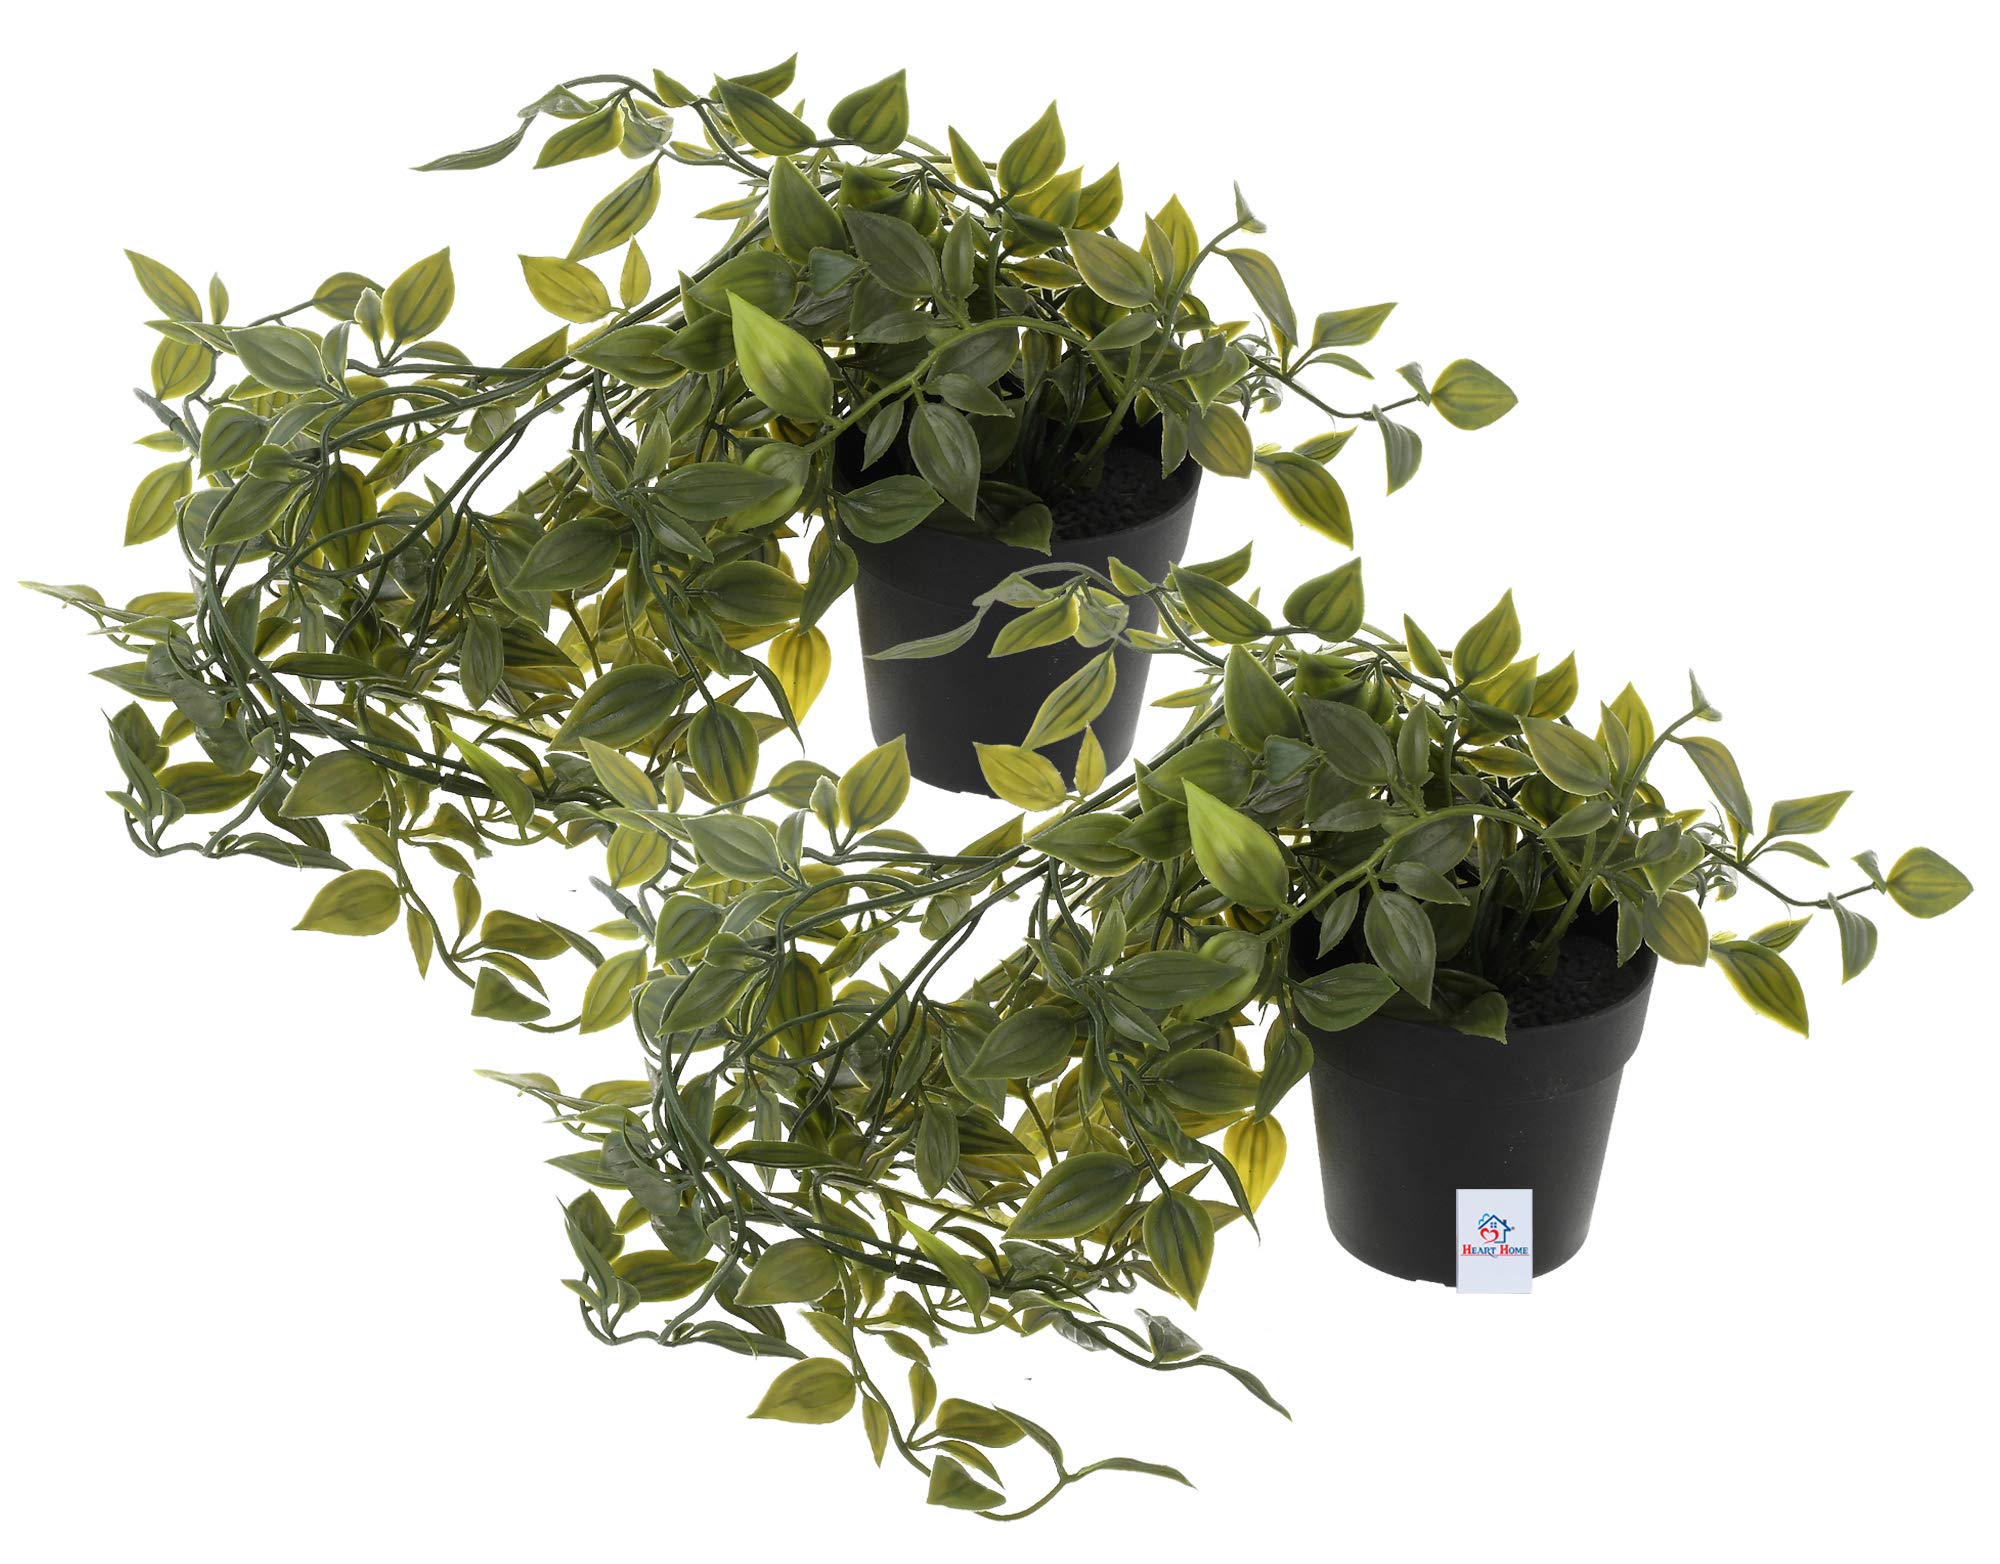 Heart Home Artificial Vine Plants with Pot|Natural Look & Plastic Material|Easy Home Décor with Small Size Pot|Size 27 x 75 x 7 CM, Pack of 2 (Green and Black)